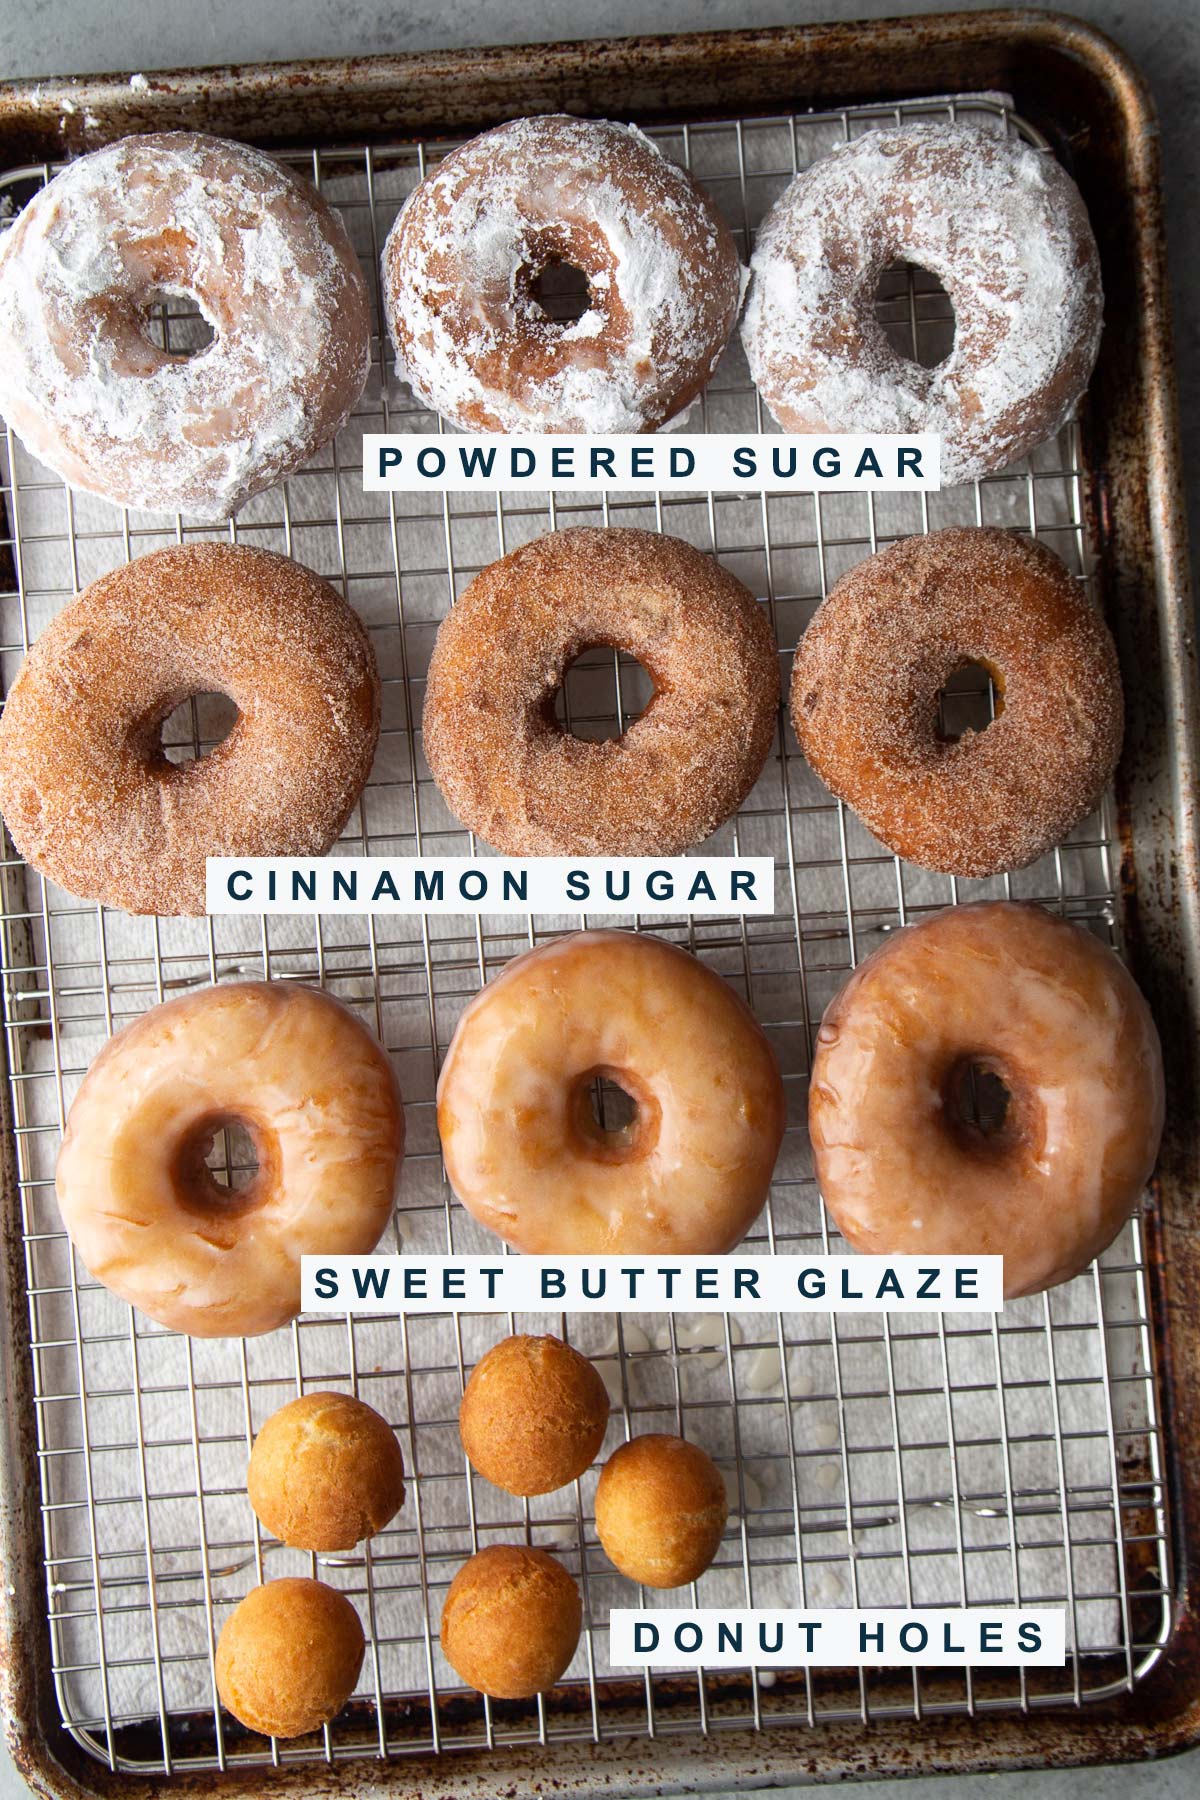 variations in buttermilk doughnut coating include powdered sugar, cinnamon sugar, and sweet butter glaze.